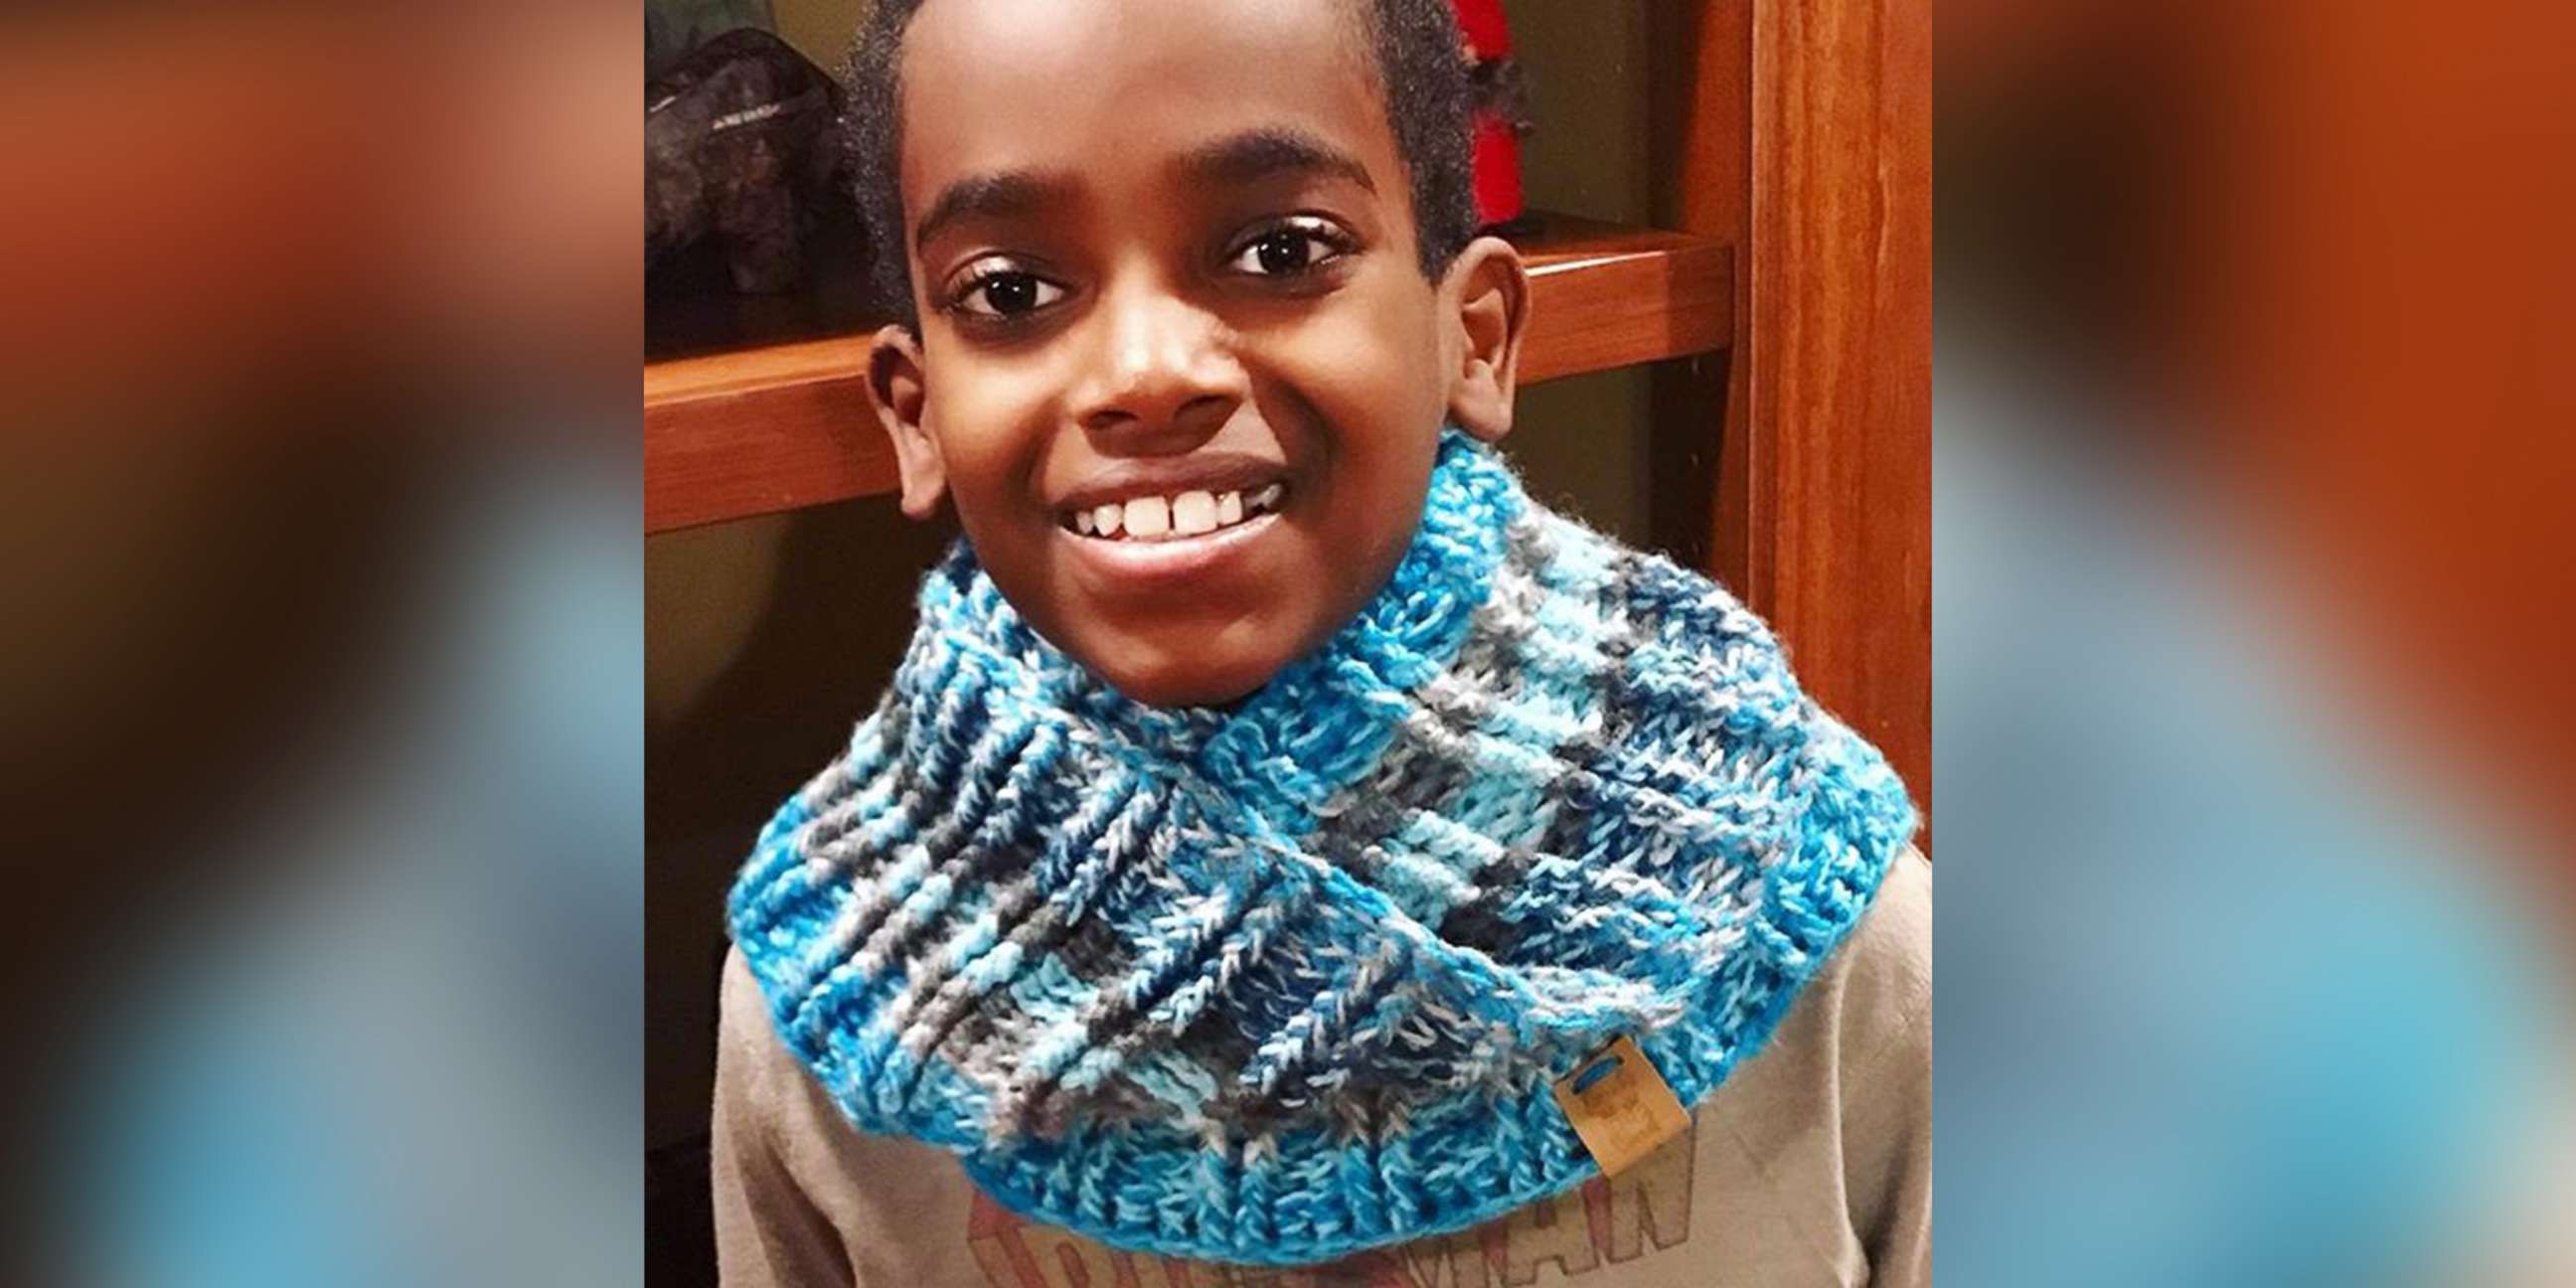 PHOTO: Jonah Larson of LaCrosse, Wis., is an 11-year-old crochet prodigy.